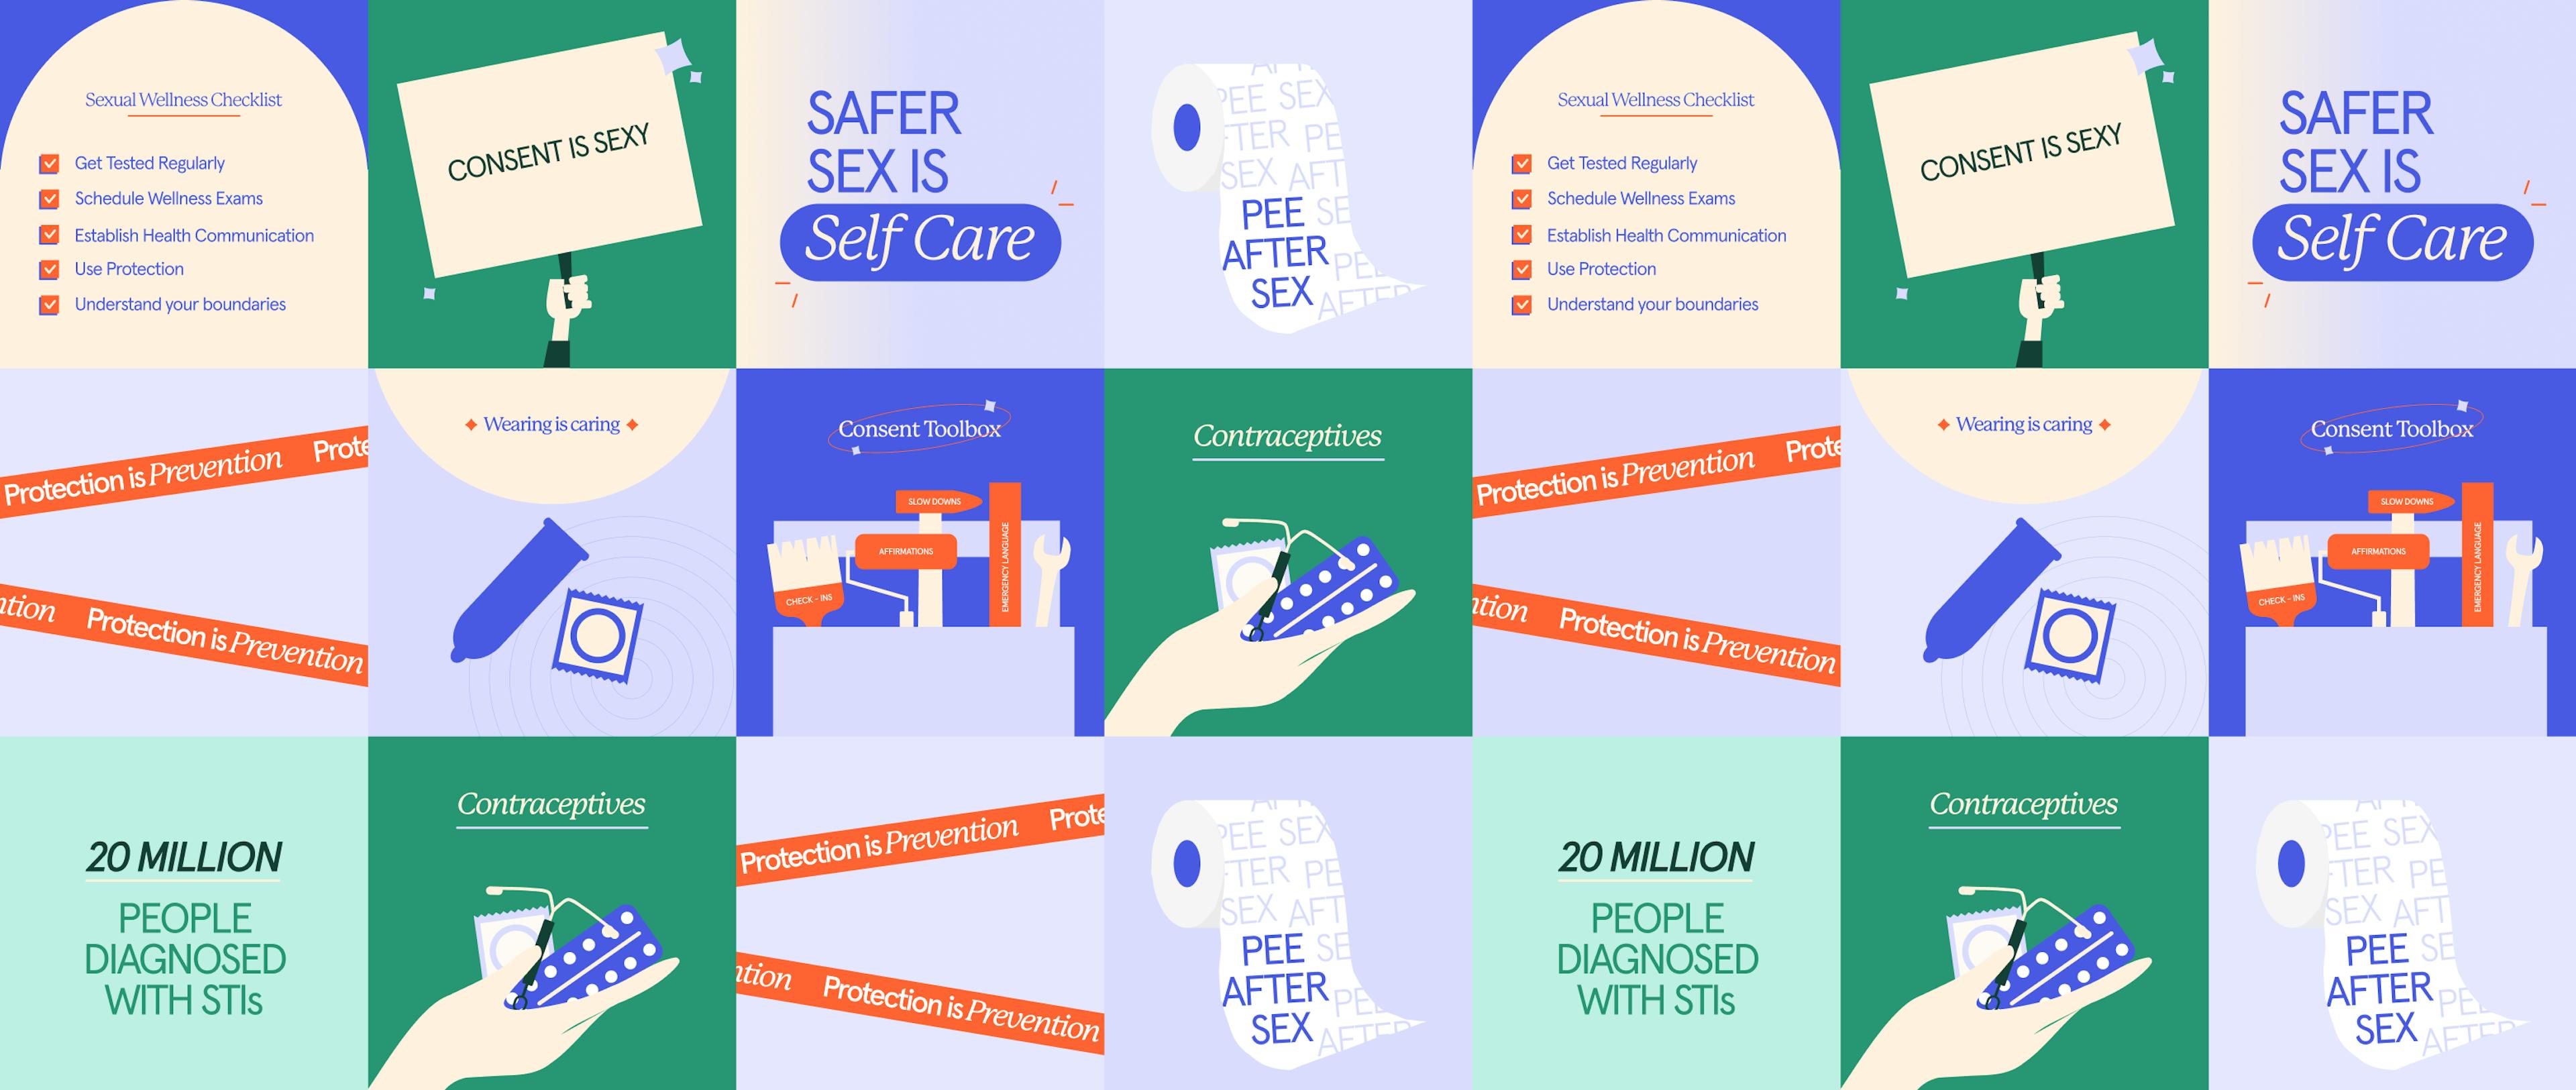 An informative collage about safe sex practices and STIs